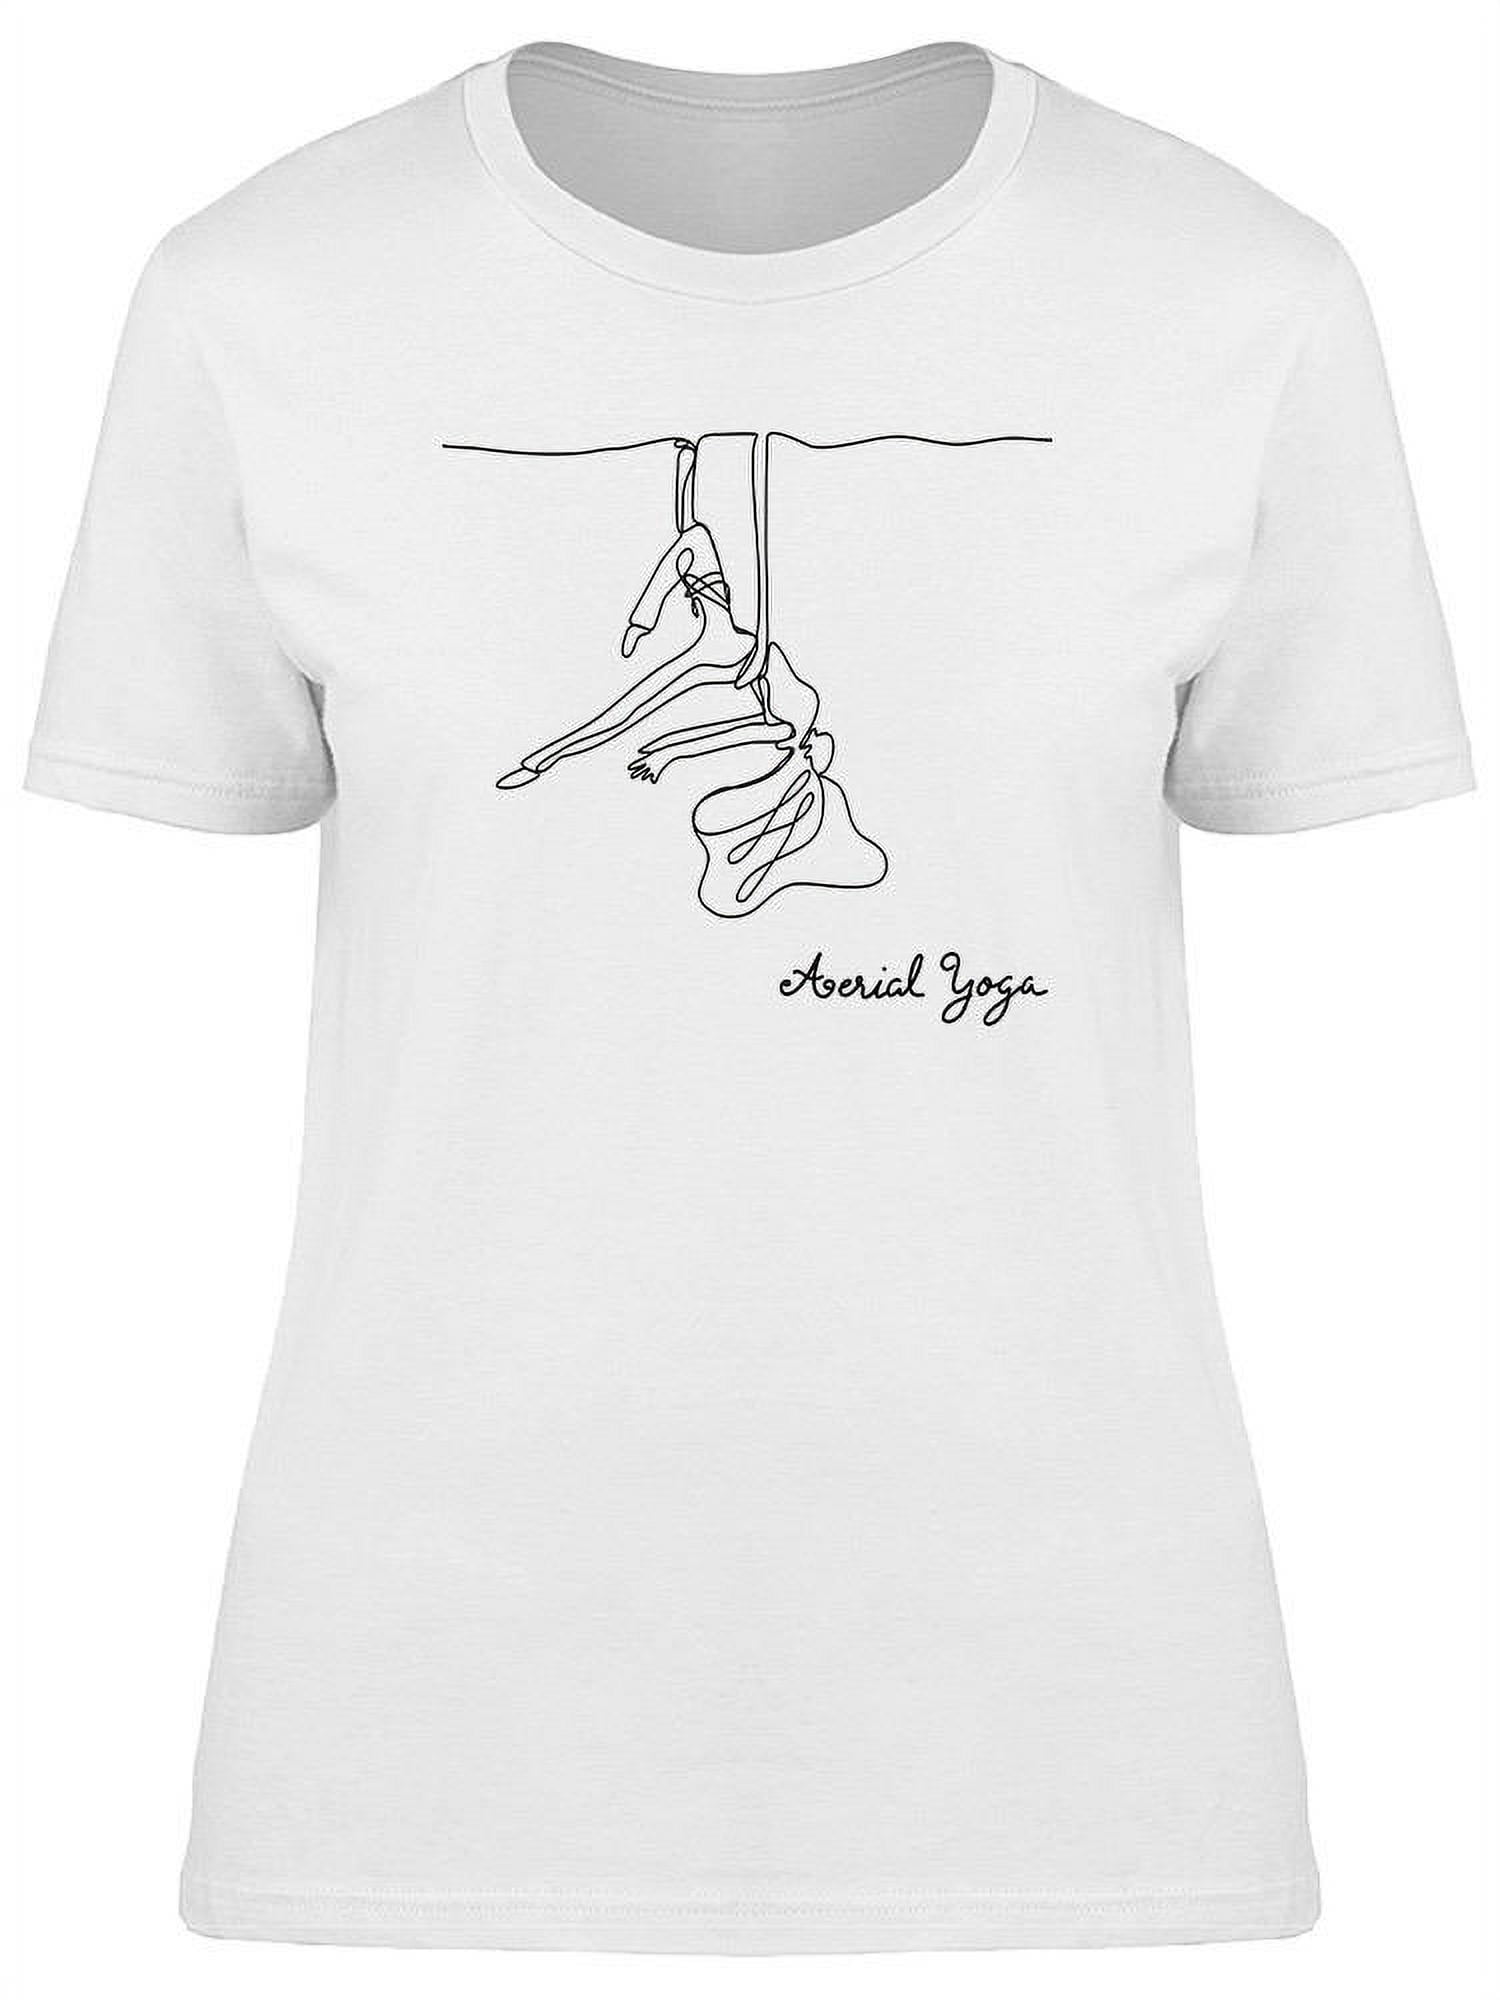 Aerial Yoga Silhouette T-Shirt Women -Image by Shutterstock